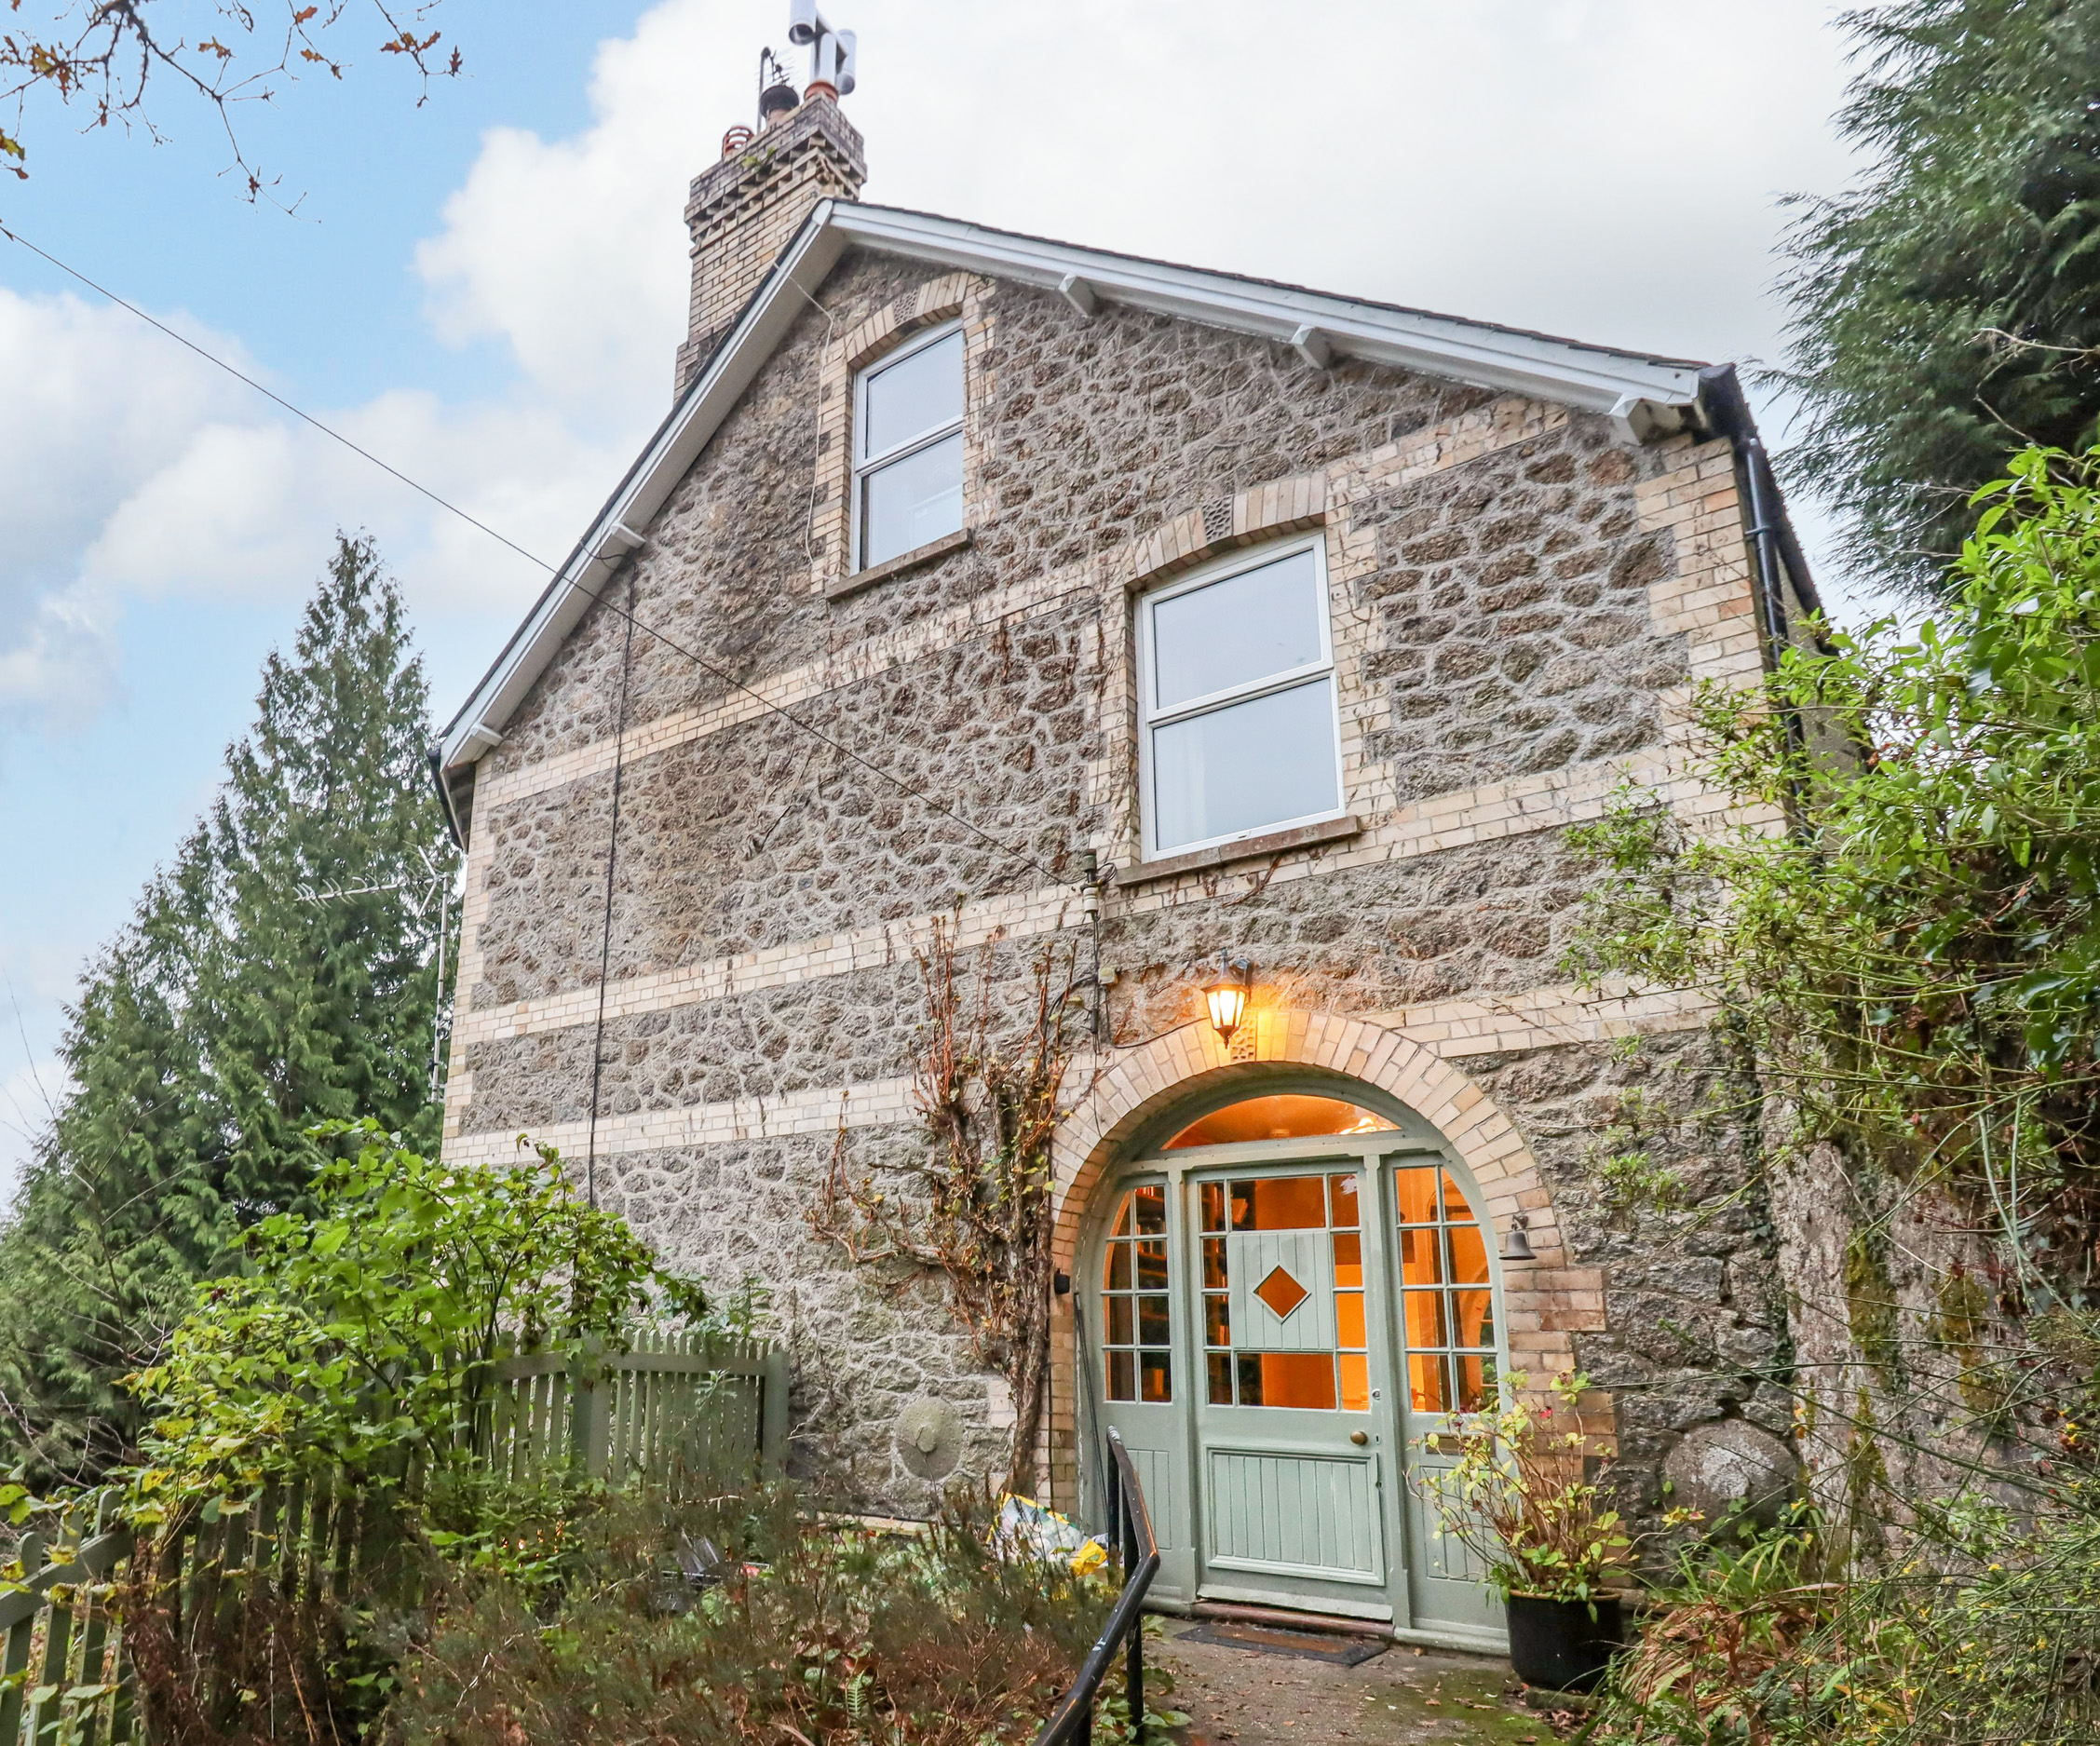 5 bedroom Cottage for rent in Newton Abbot